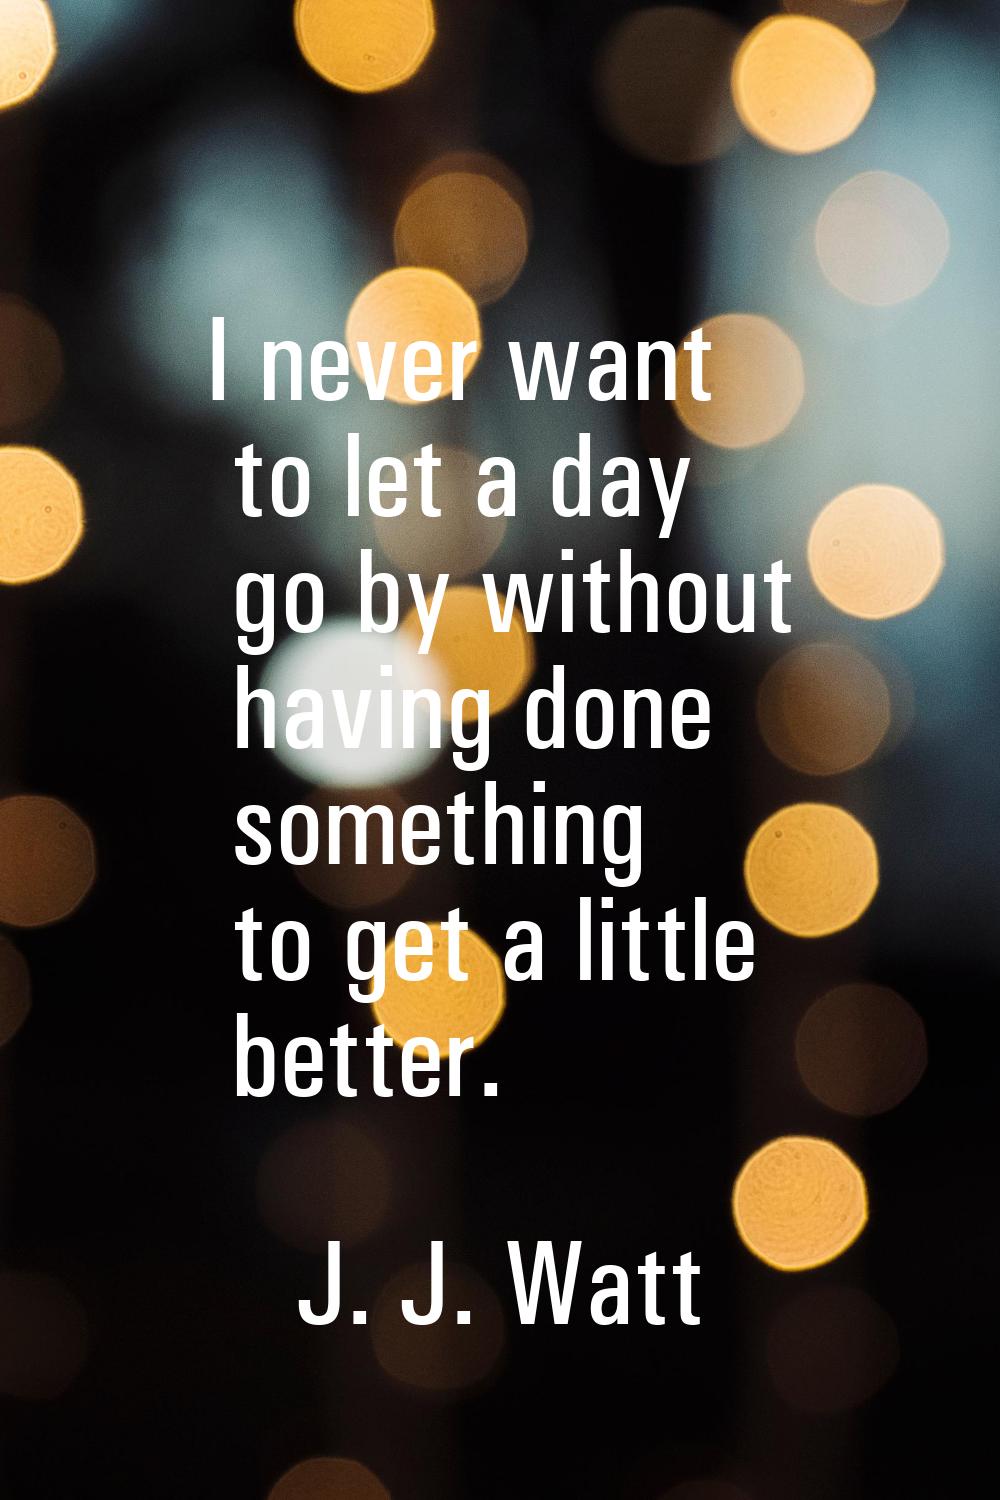 I never want to let a day go by without having done something to get a little better.